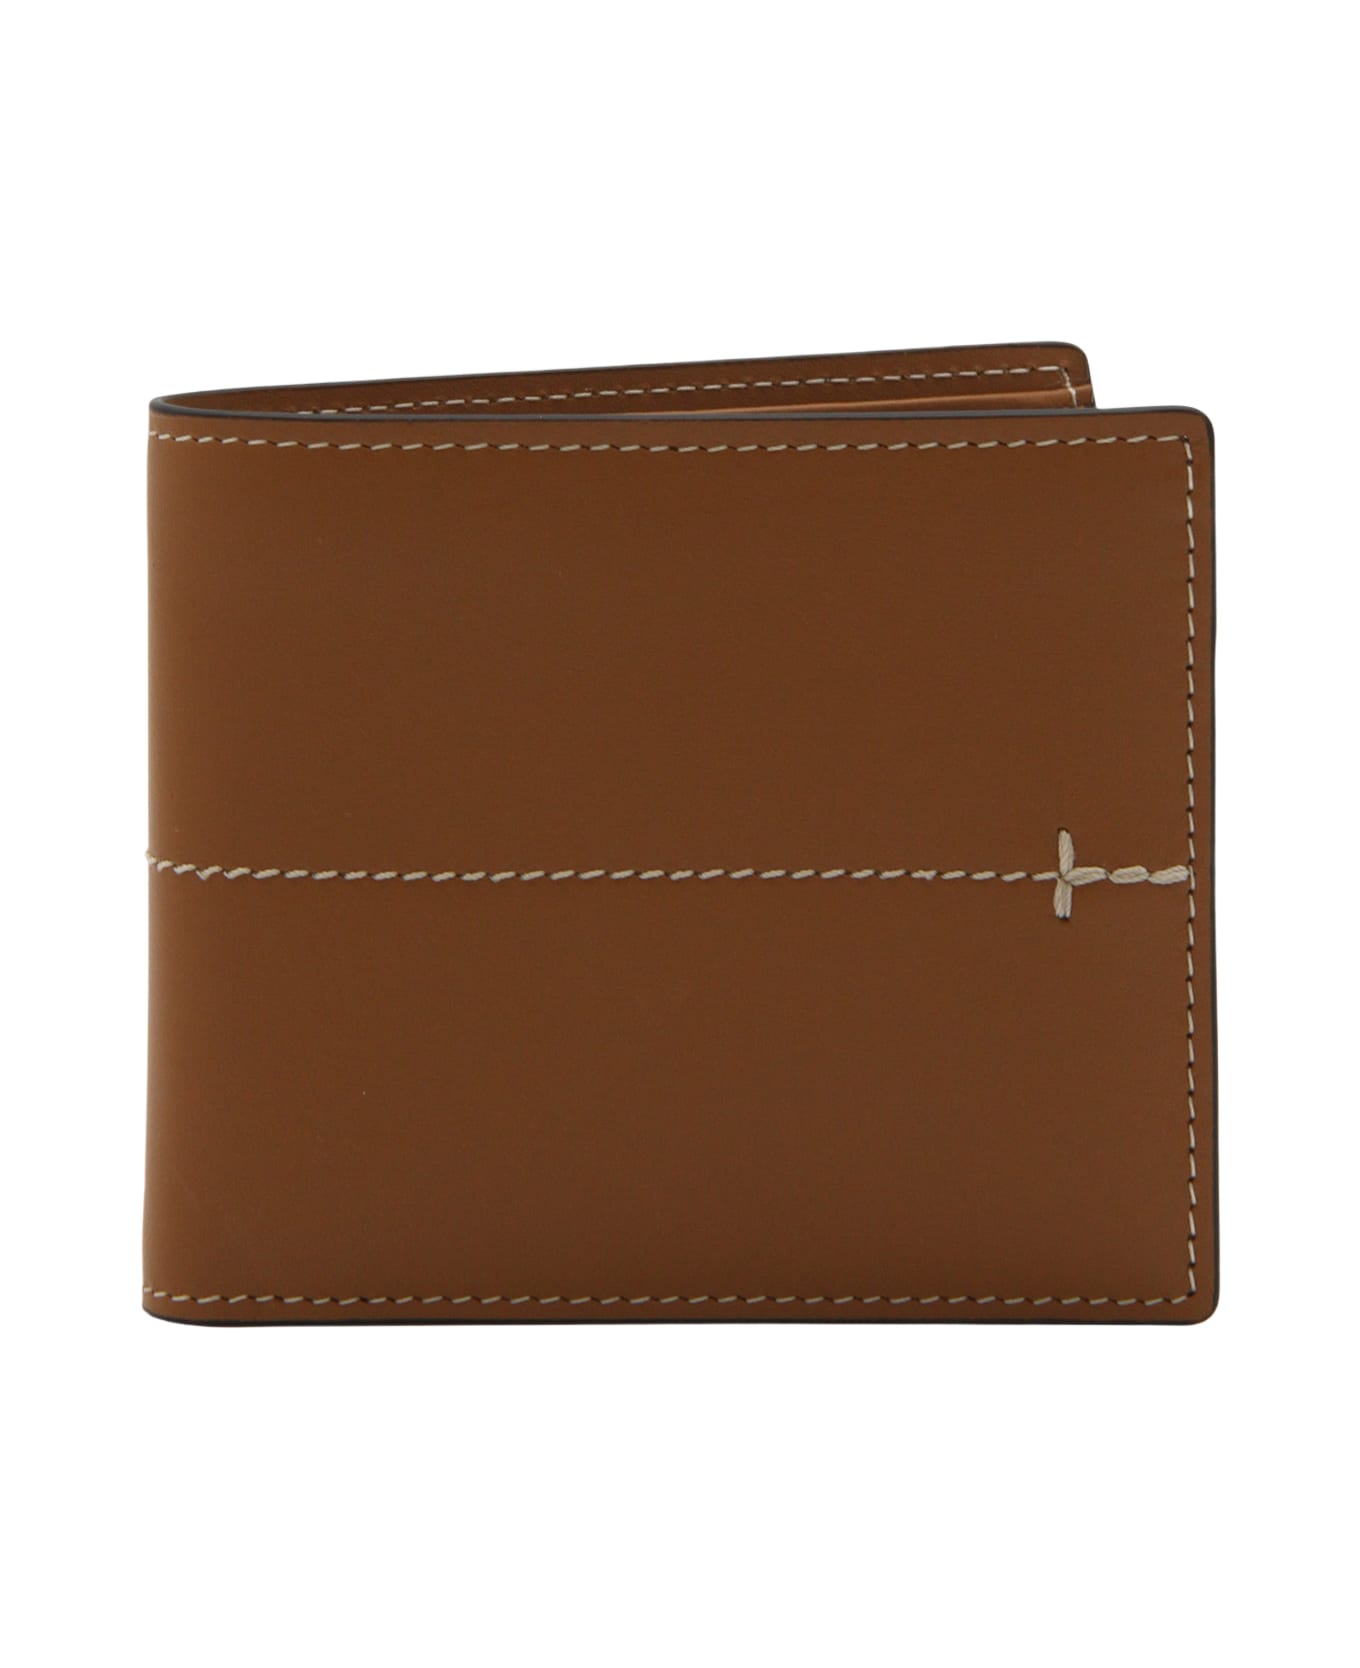 Tod's Brown Leather Wallet - KENIA SCURO